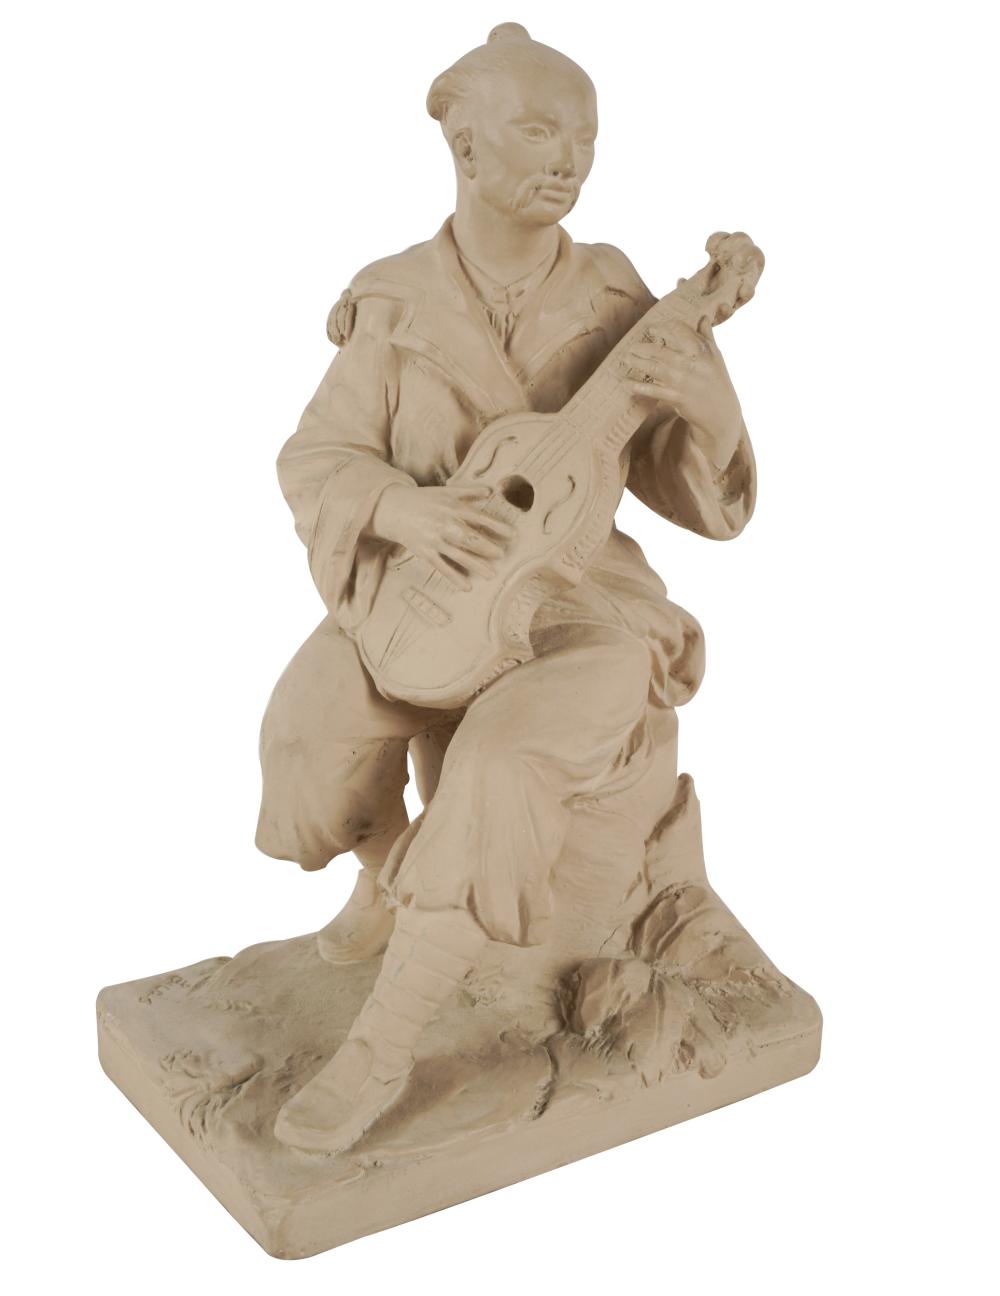 TERRACOTTA FIGURE "LUTE PLAYER"from